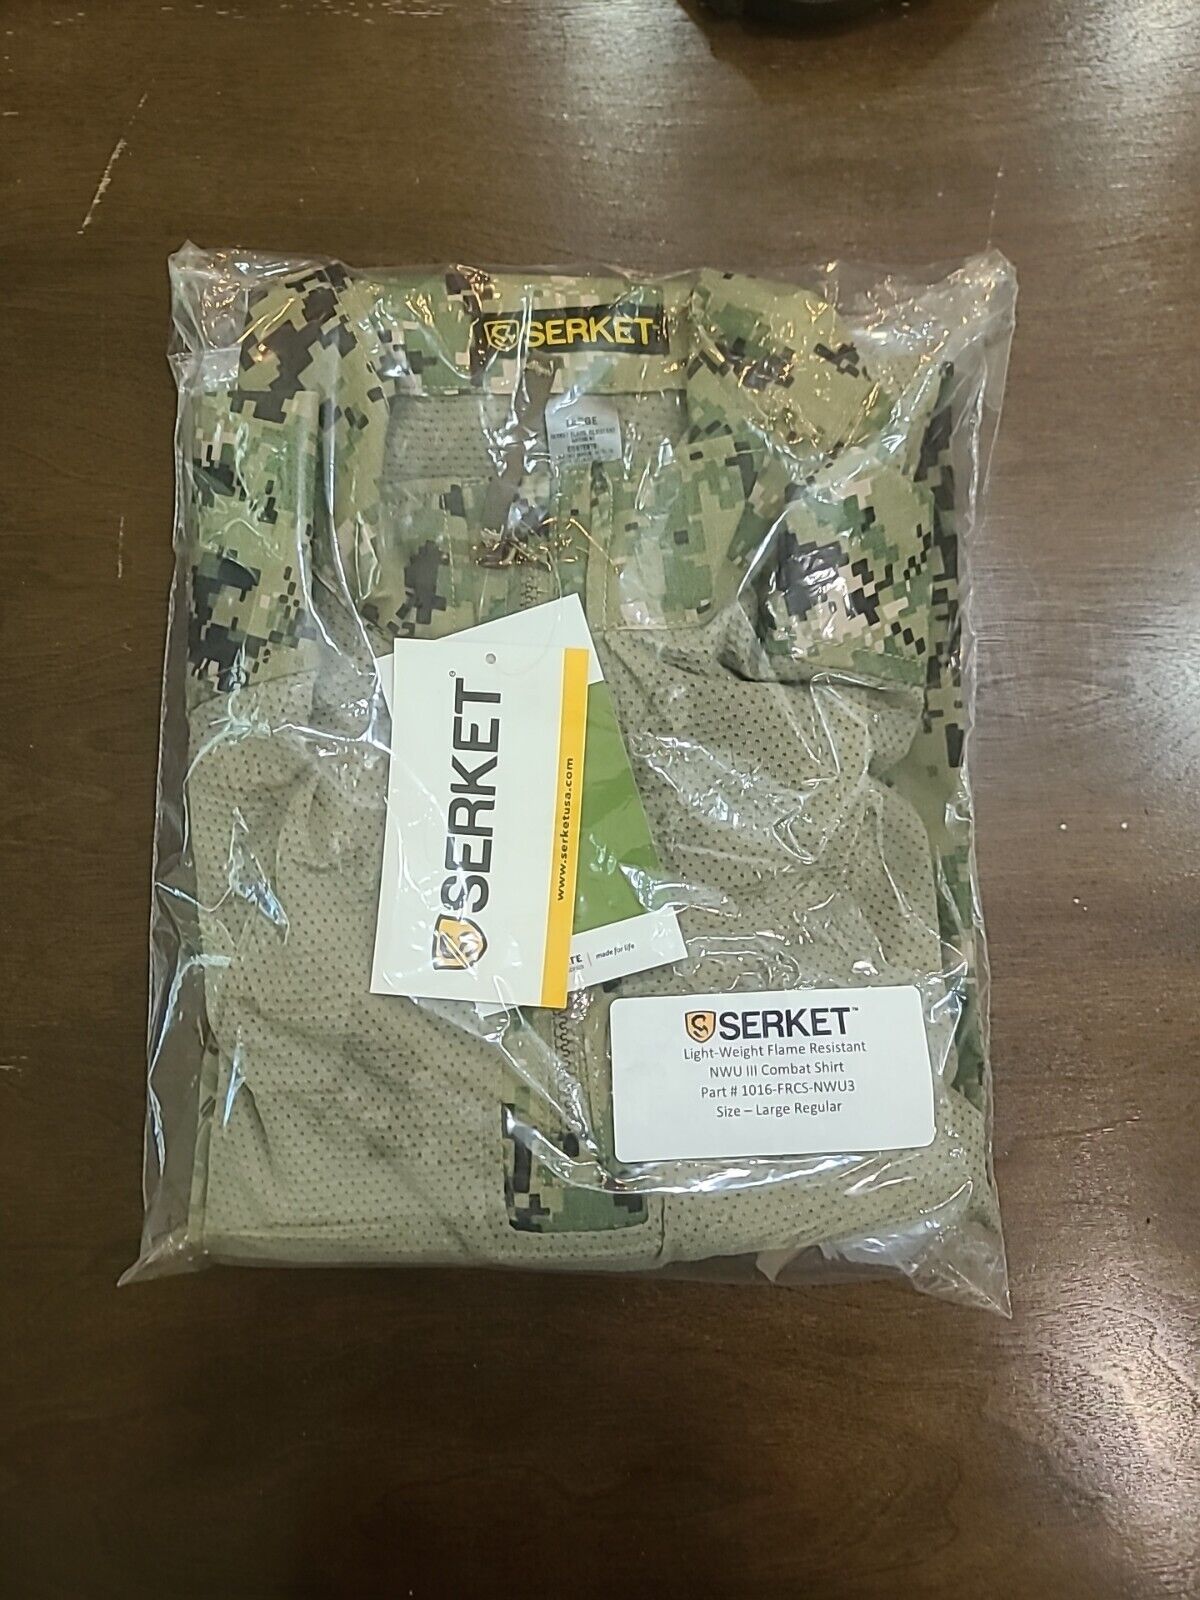 RARE SERKET AOR2 Combat Shirt NSW AND SFG ISSUE ONLY BRAND NEW LARGE REGULAR